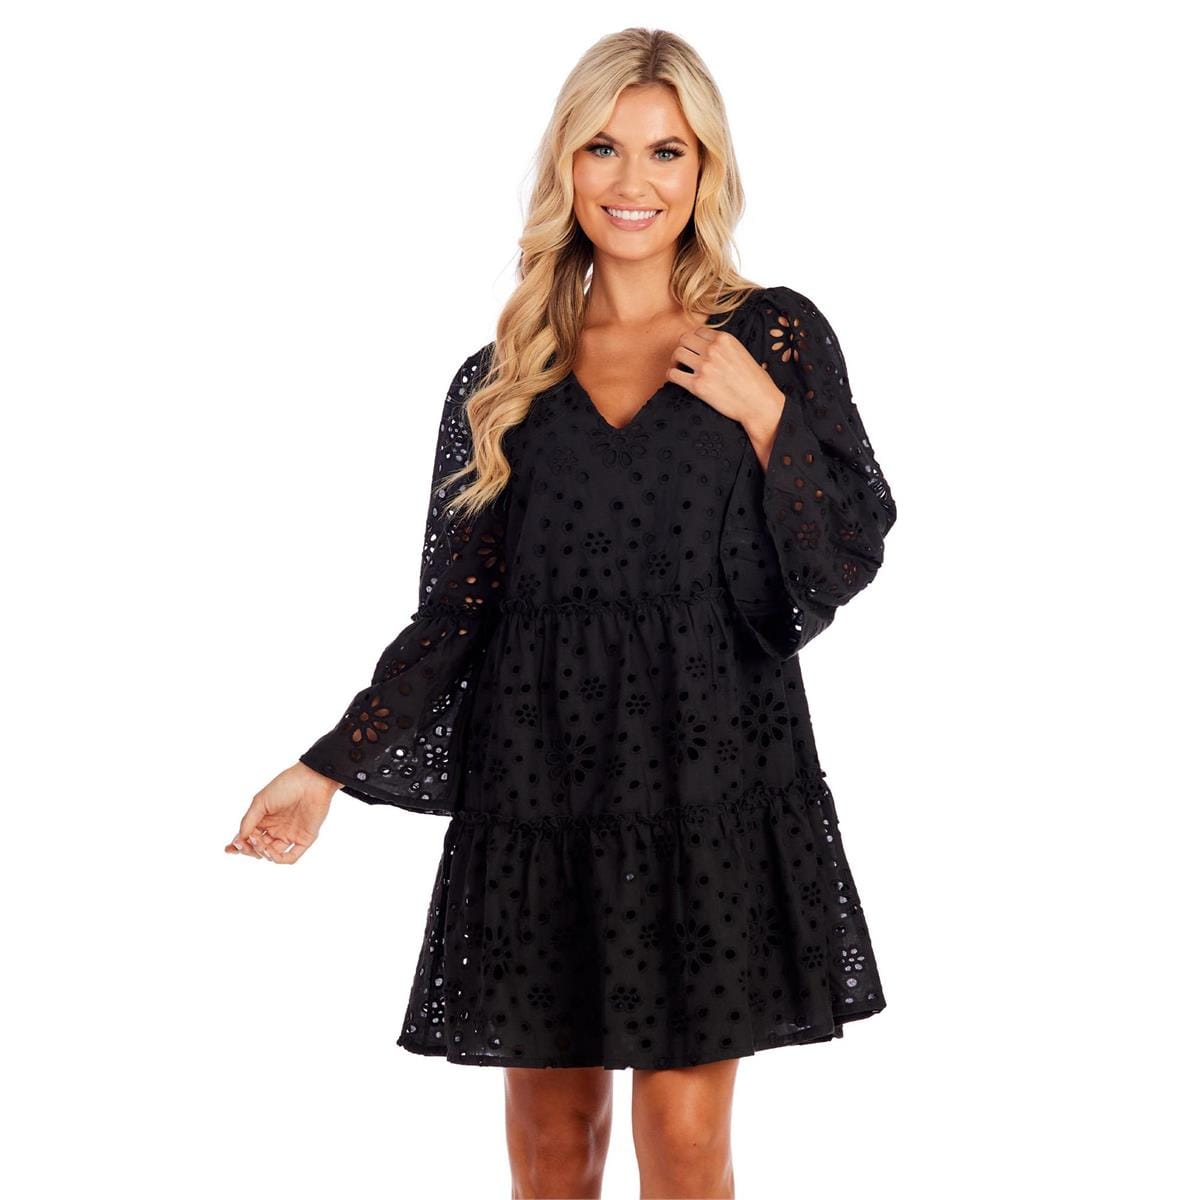 Meredith Eyelet Dress in Black Mattie B's Gifts & Apparel Small